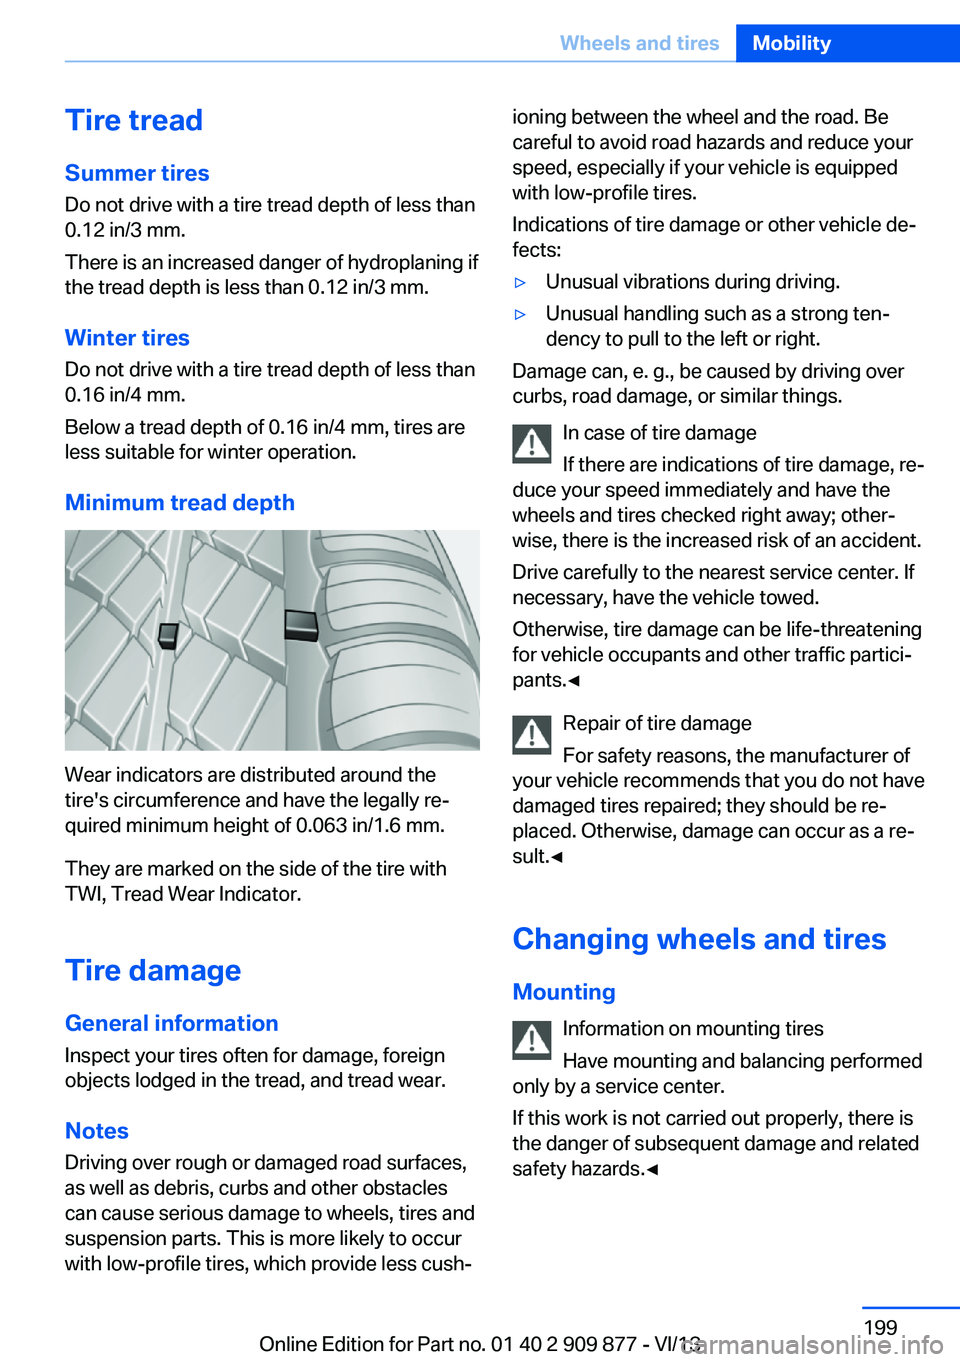 BMW 640I GRAN COUPE 2014  Owners Manual Tire treadSummer tires
Do not drive with a tire tread depth of less than
0.12 in/3 mm.
There is an increased danger of hydroplaning if
the tread depth is less than 0.12 in/3 mm.
Winter tires Do not dr